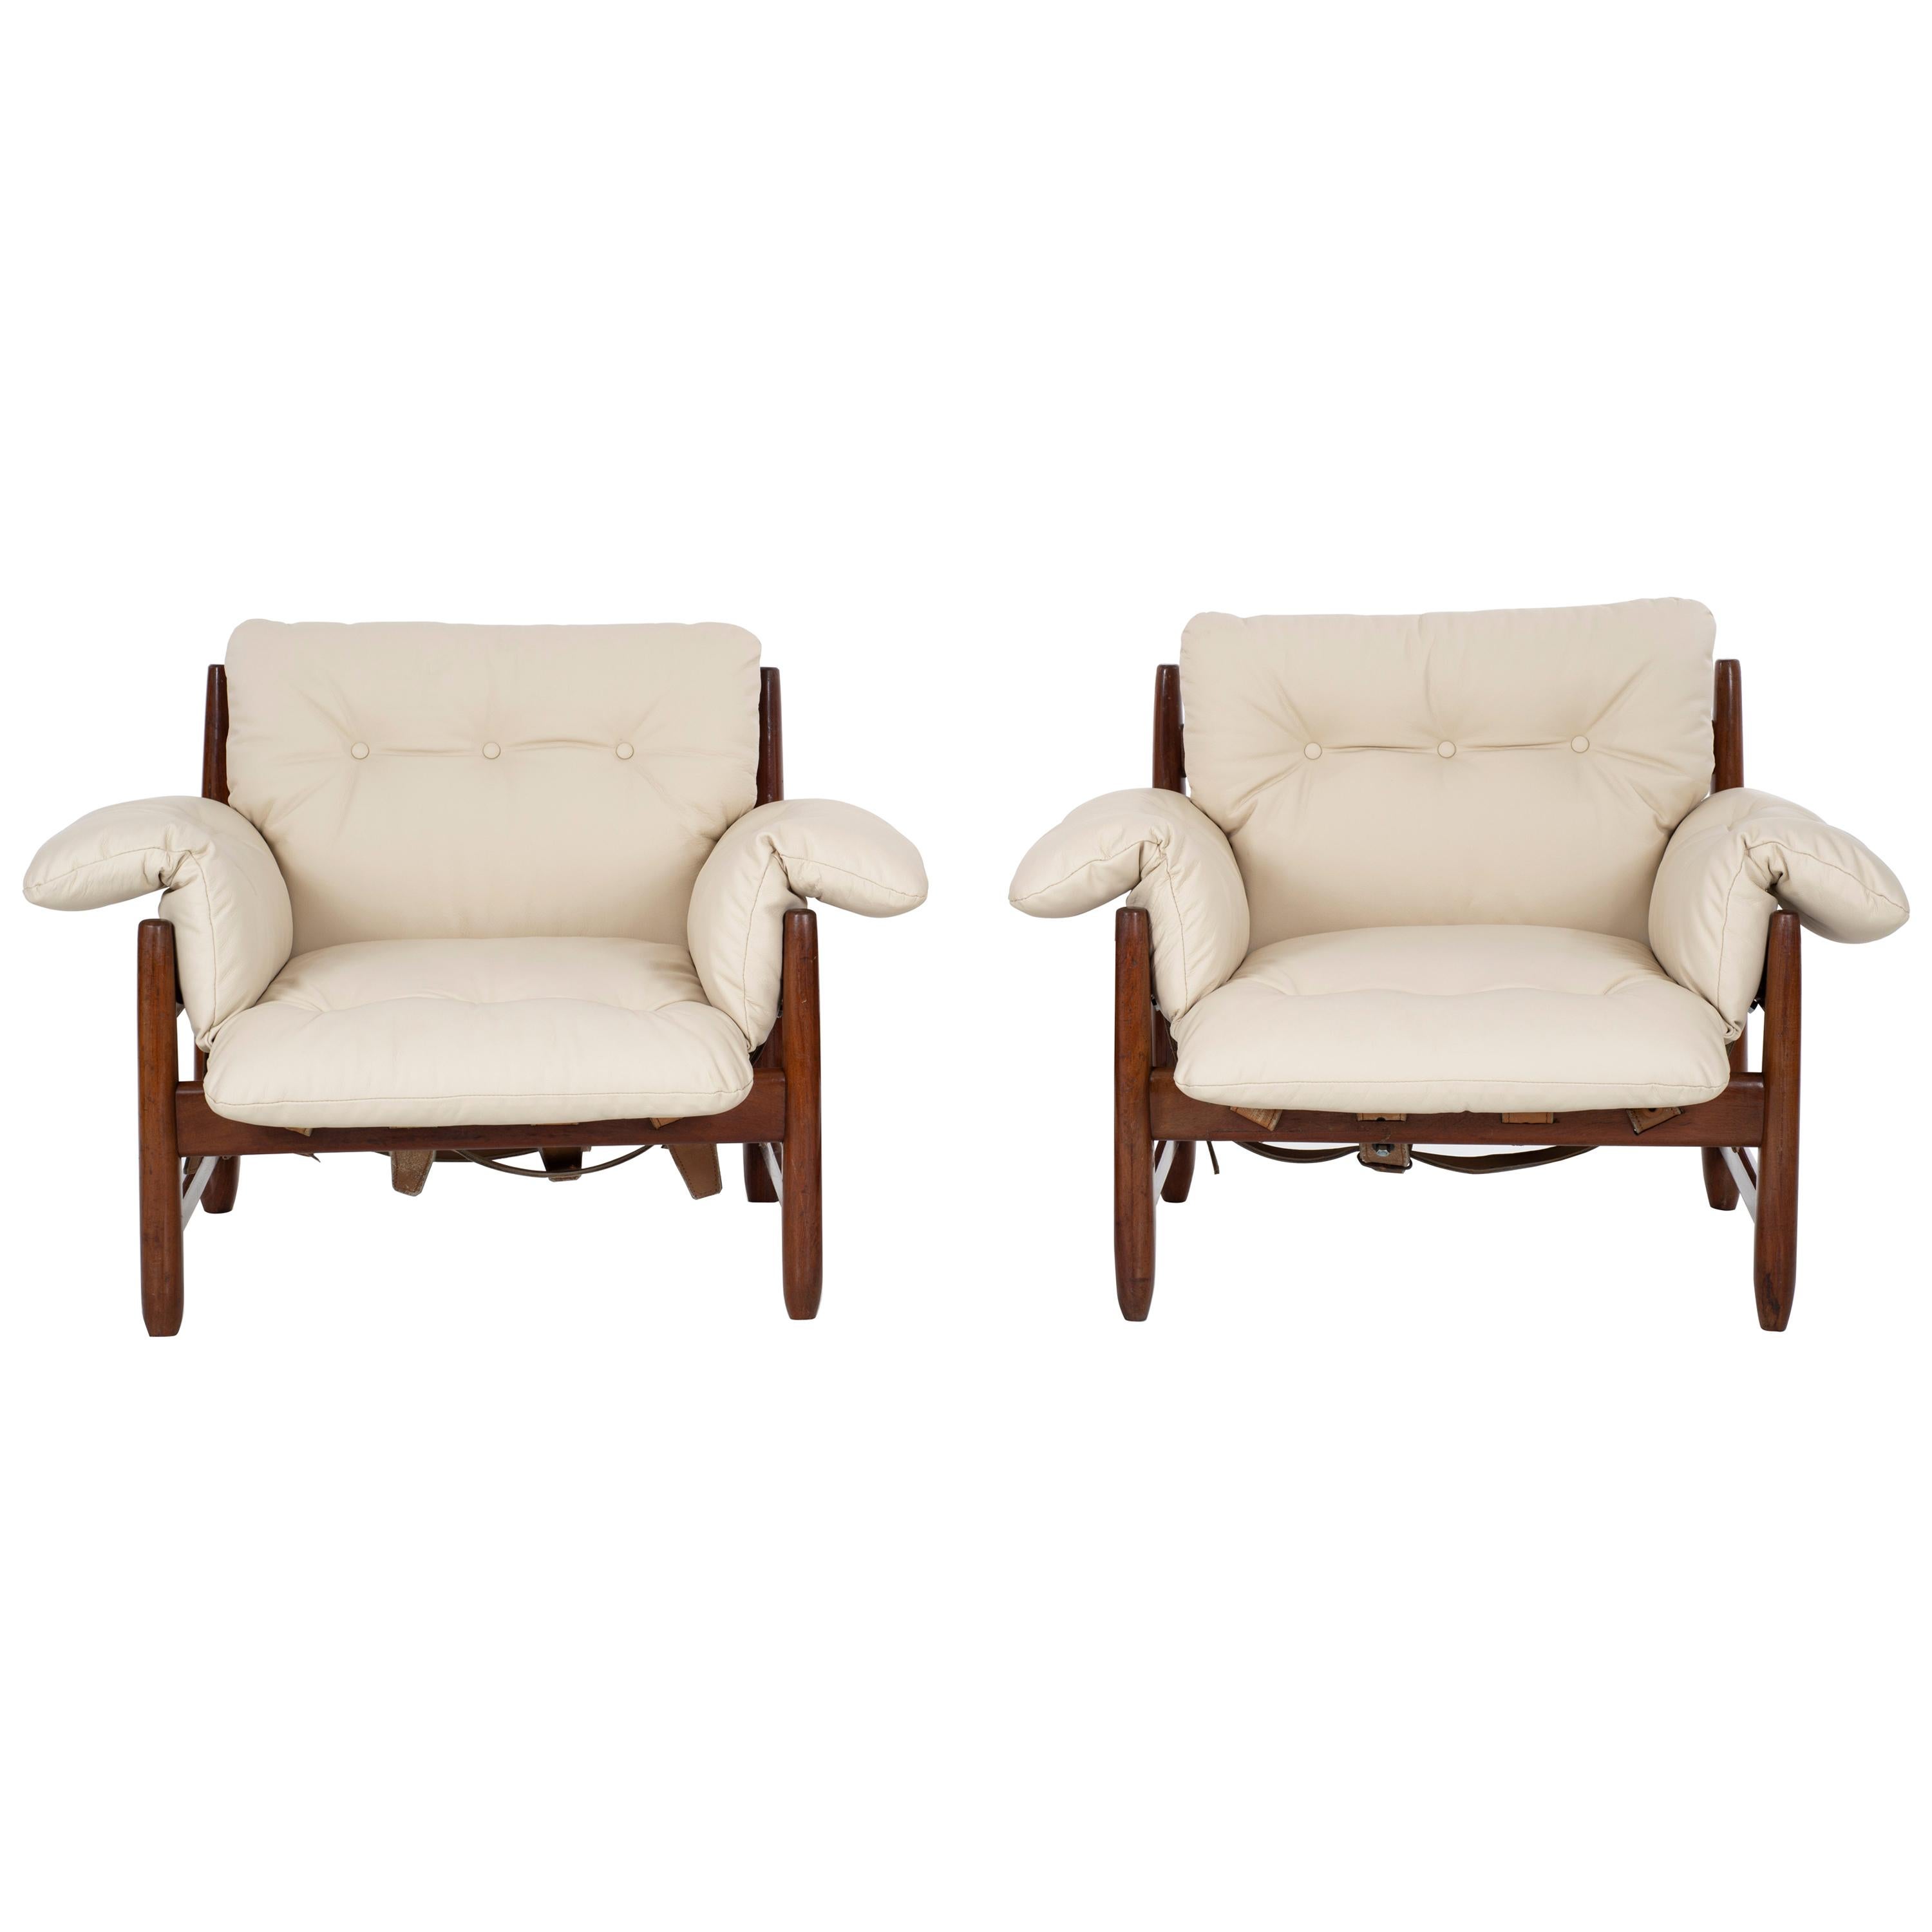 Pair of Sergio Rodrigues "Mole" Armchairs